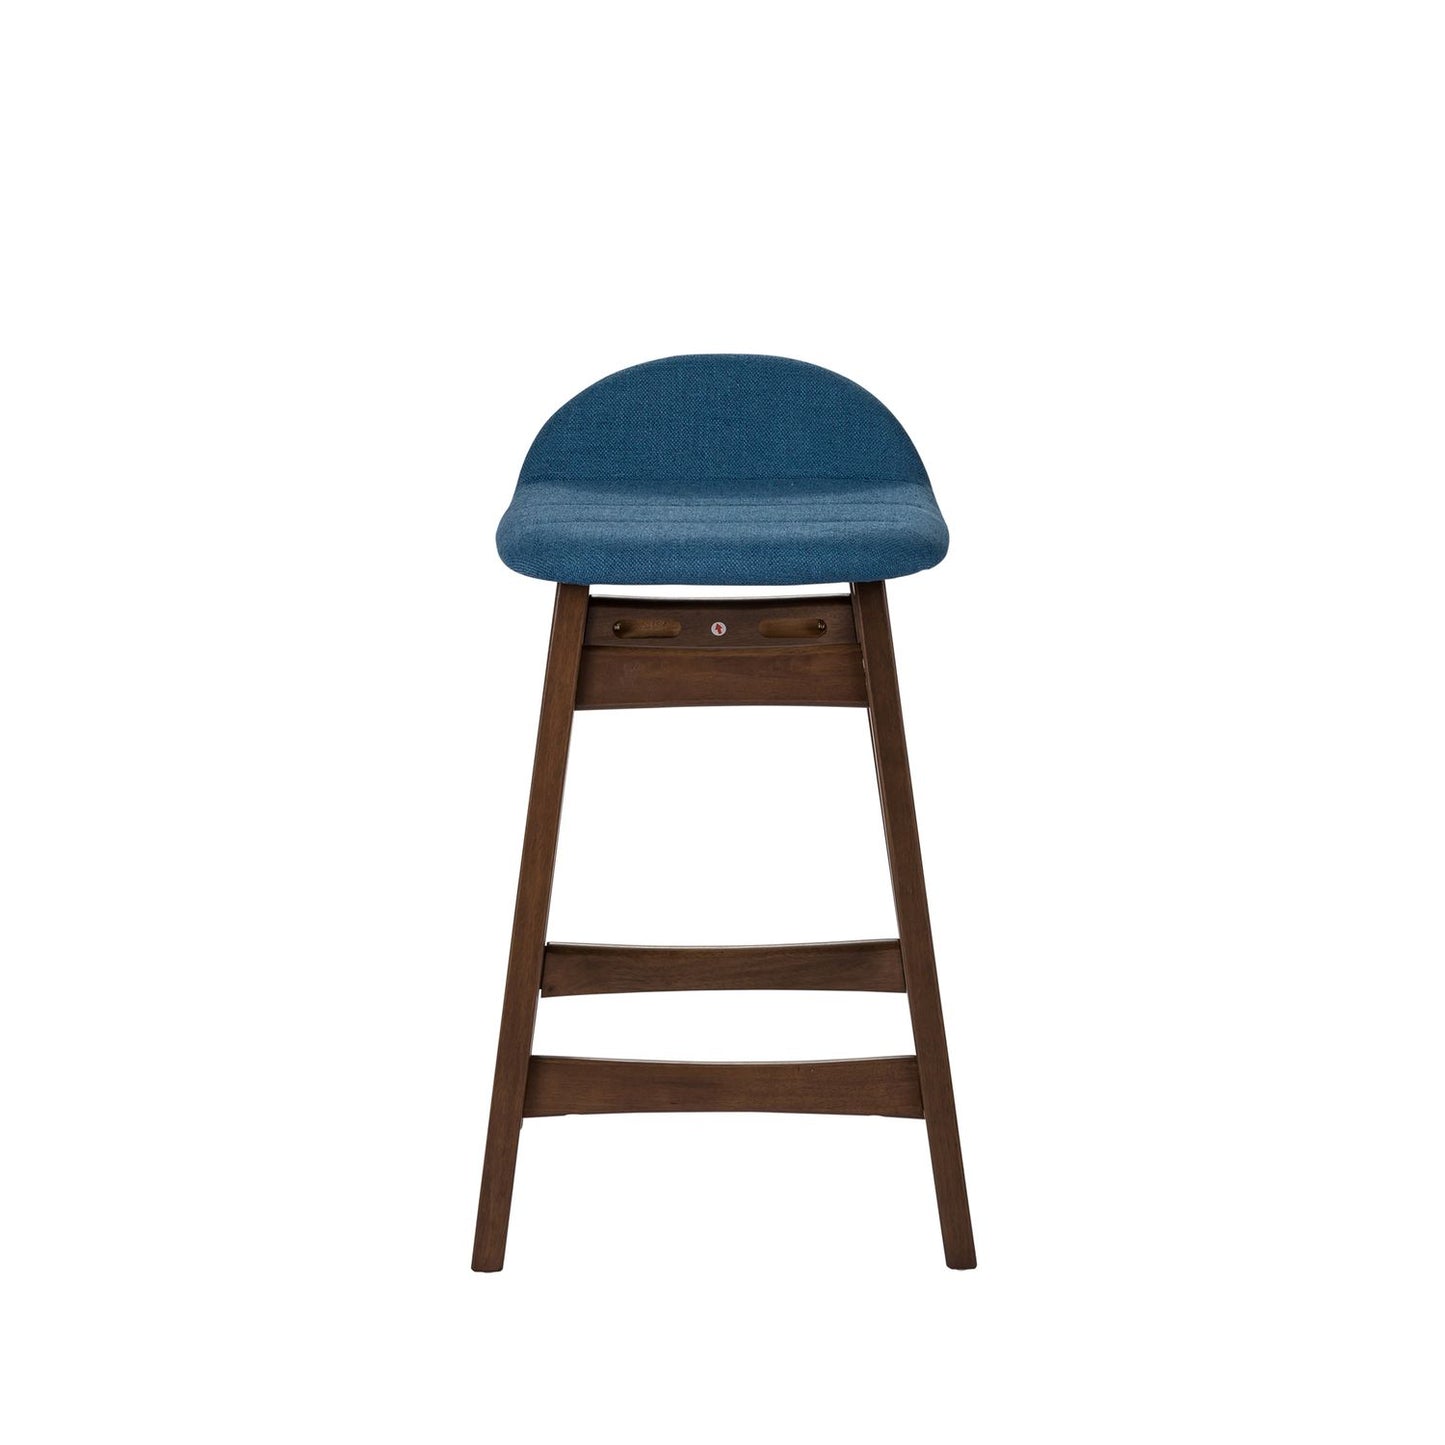 Space Savers Group Barstool Blue 30" Seat Height